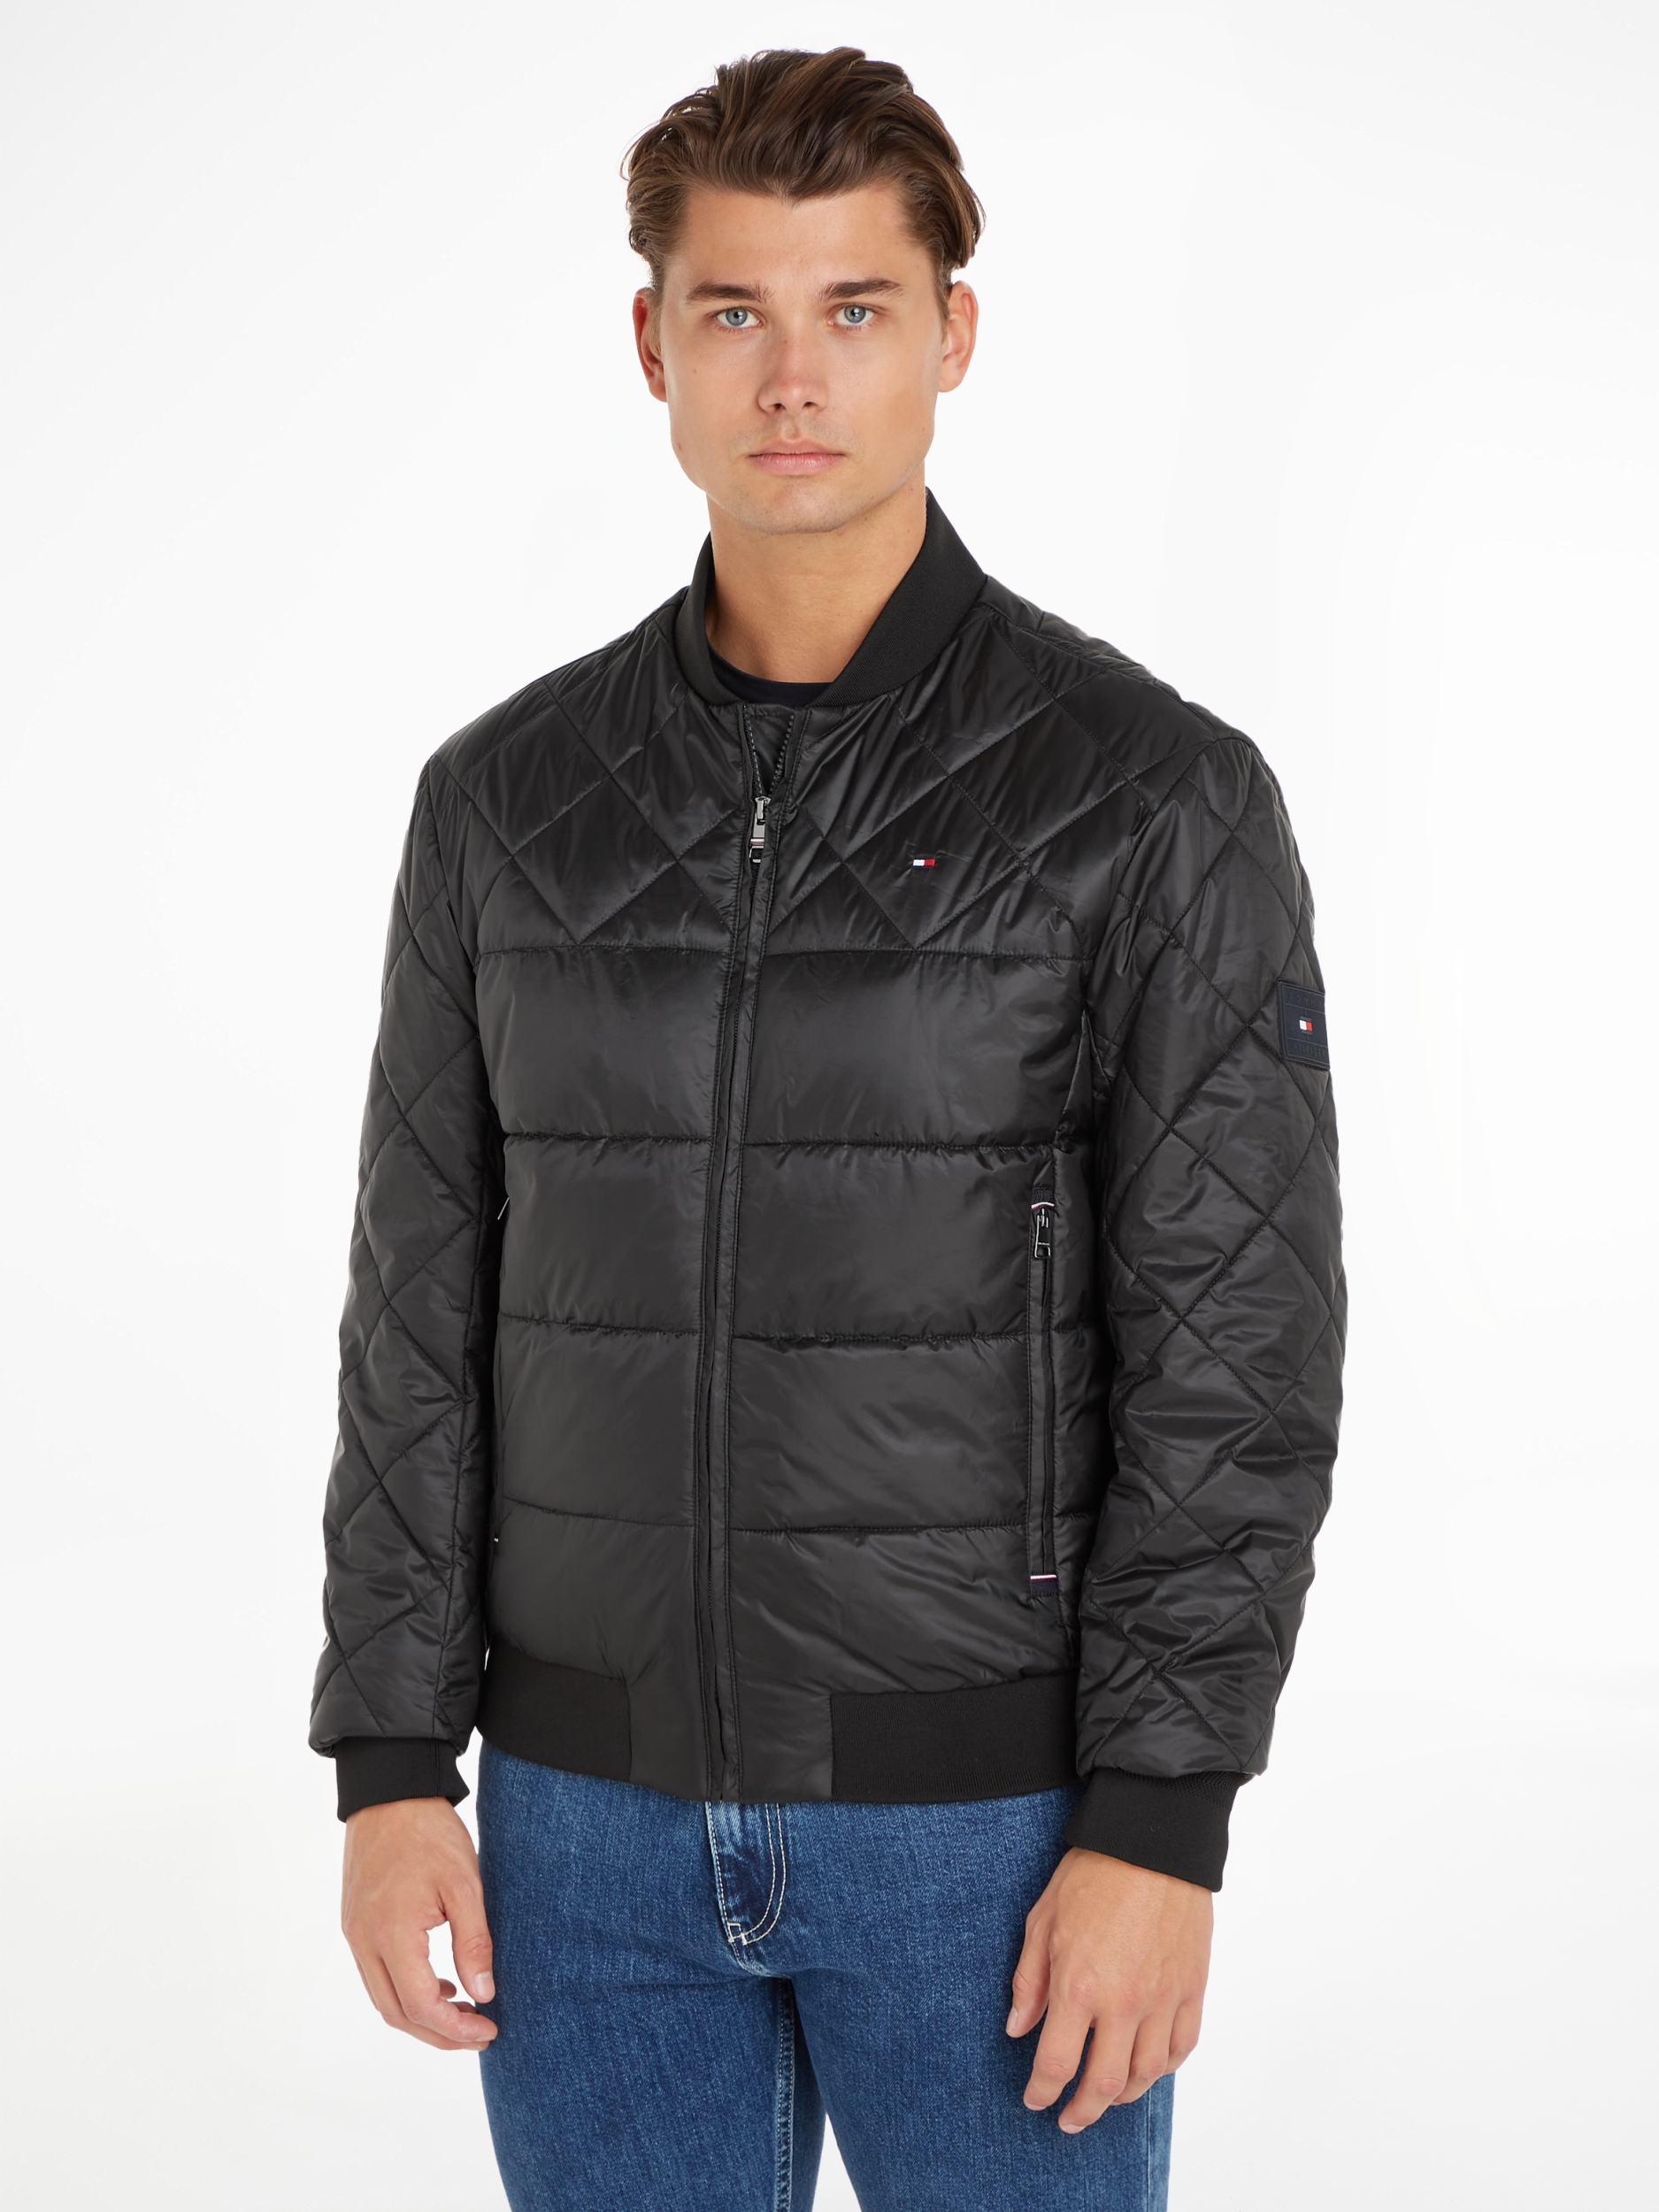 PACKABLE | BOMBER XL black | | RECYCLED MW0MW31633-BDS-XL